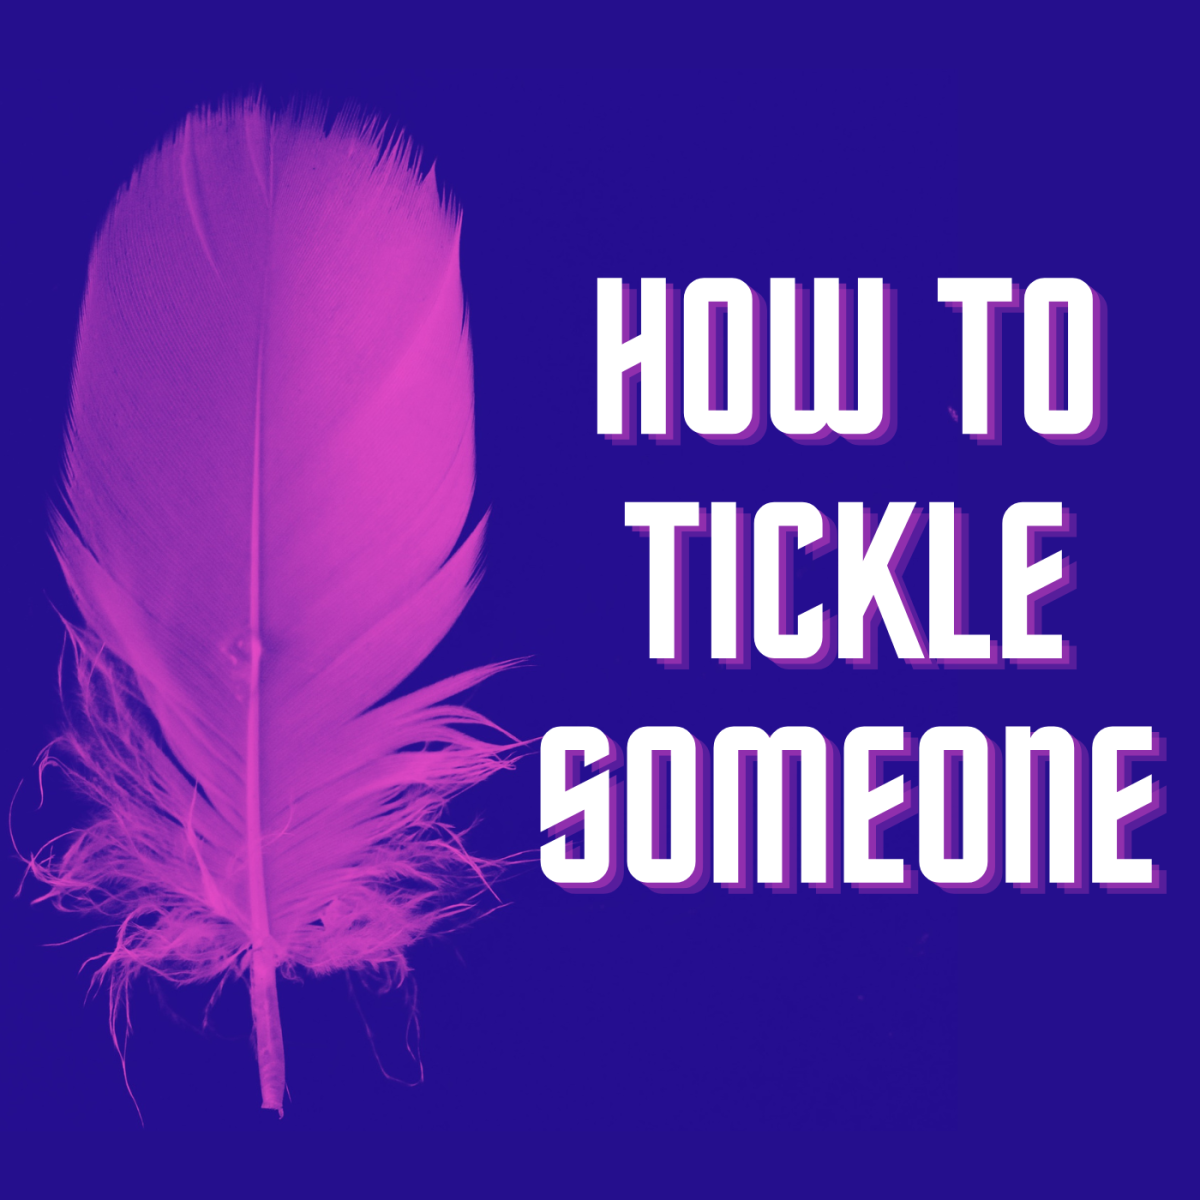 Girl Tickle Torture